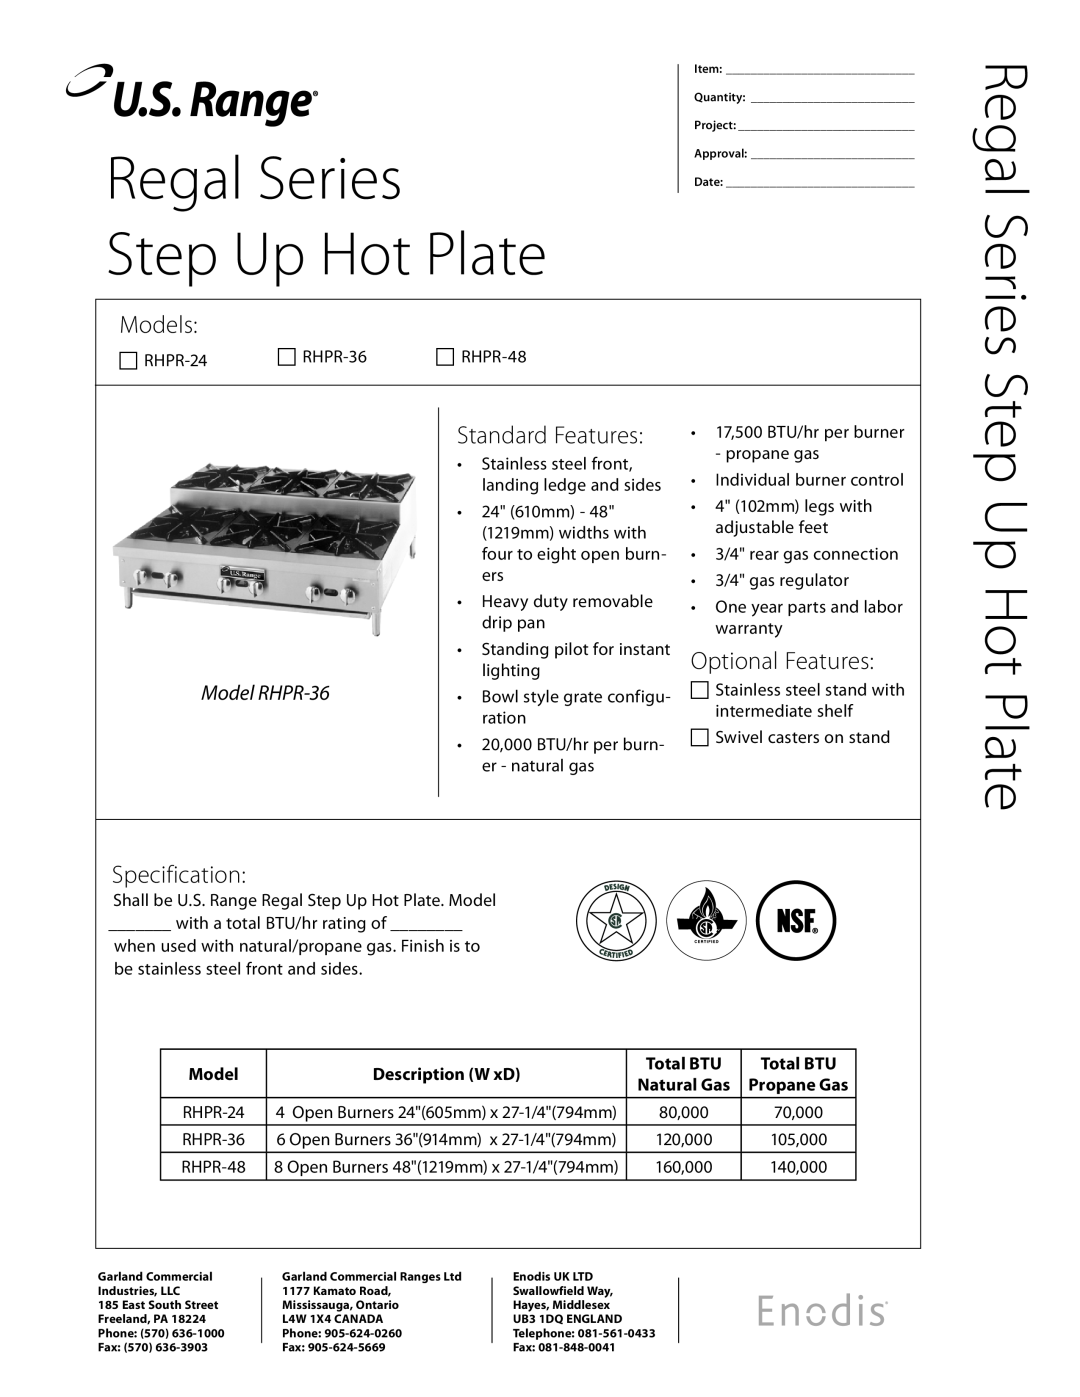 Garland RHPR-48 warranty Regal Series, Step Up Hot Plate, Models, Standard Features, Optional Features, Specification 